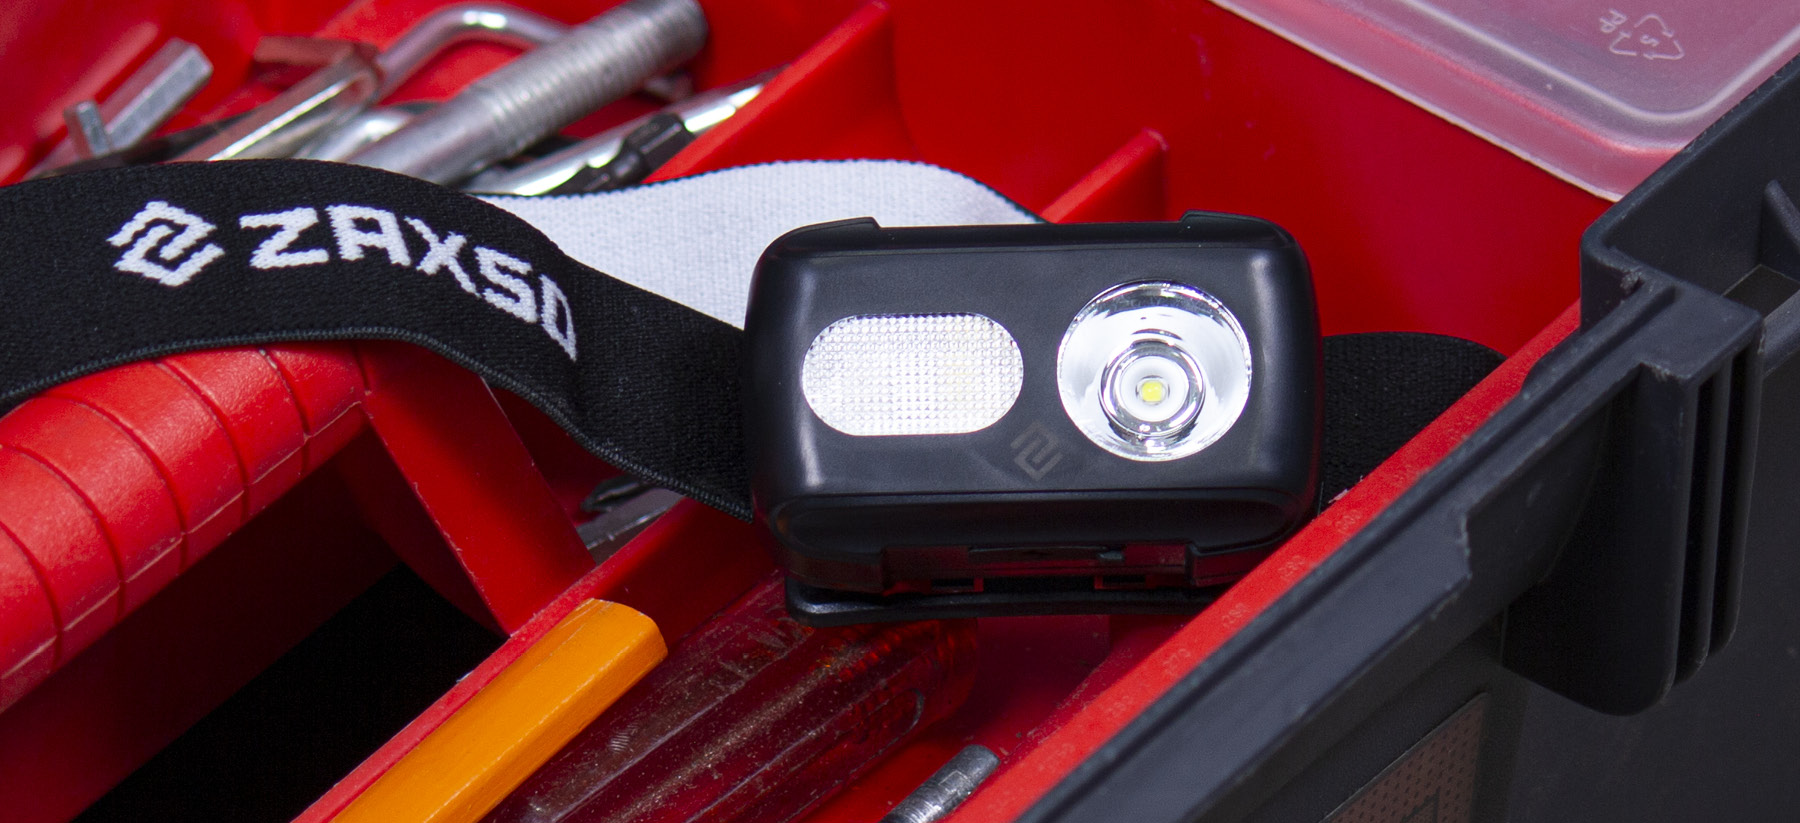 ZAXSO - HH7R - Headlamp in action